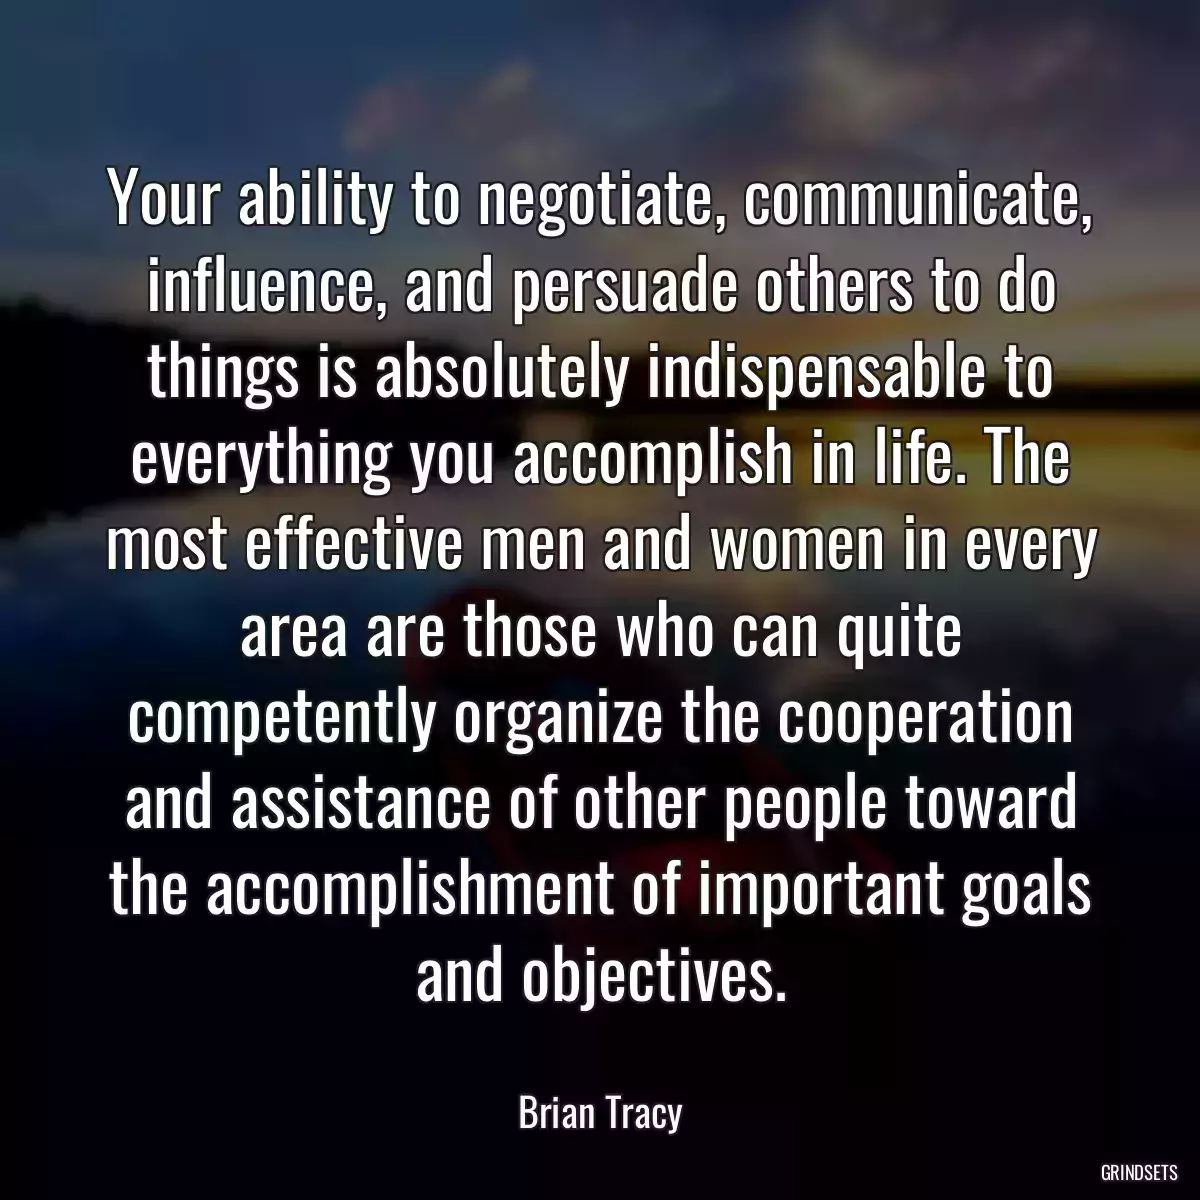 Your ability to negotiate, communicate, influence, and persuade others to do things is absolutely indispensable to everything you accomplish in life. The most effective men and women in every area are those who can quite competently organize the cooperation and assistance of other people toward the accomplishment of important goals and objectives.